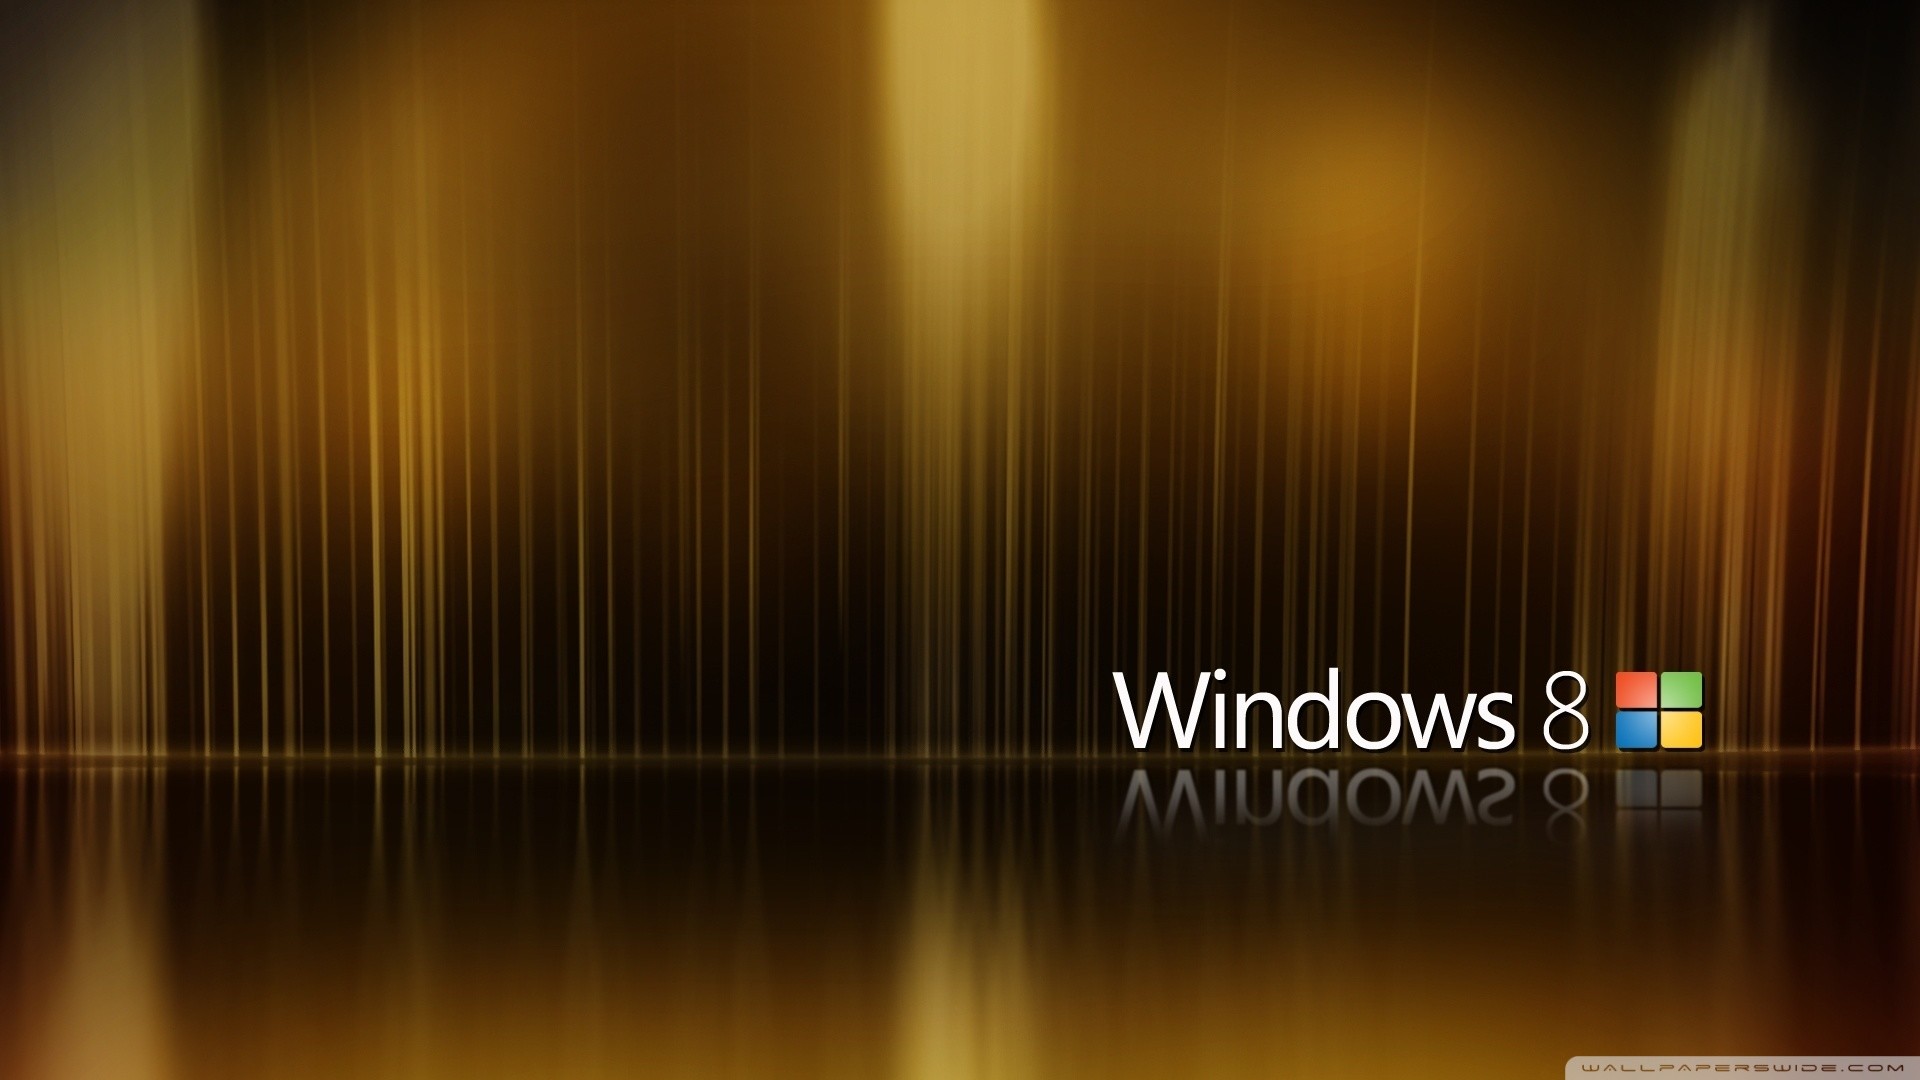 Windows HD Wallpaper 1920x1080 (67+ images) Full Hd Wallpapers For Windows 8 1920x1080